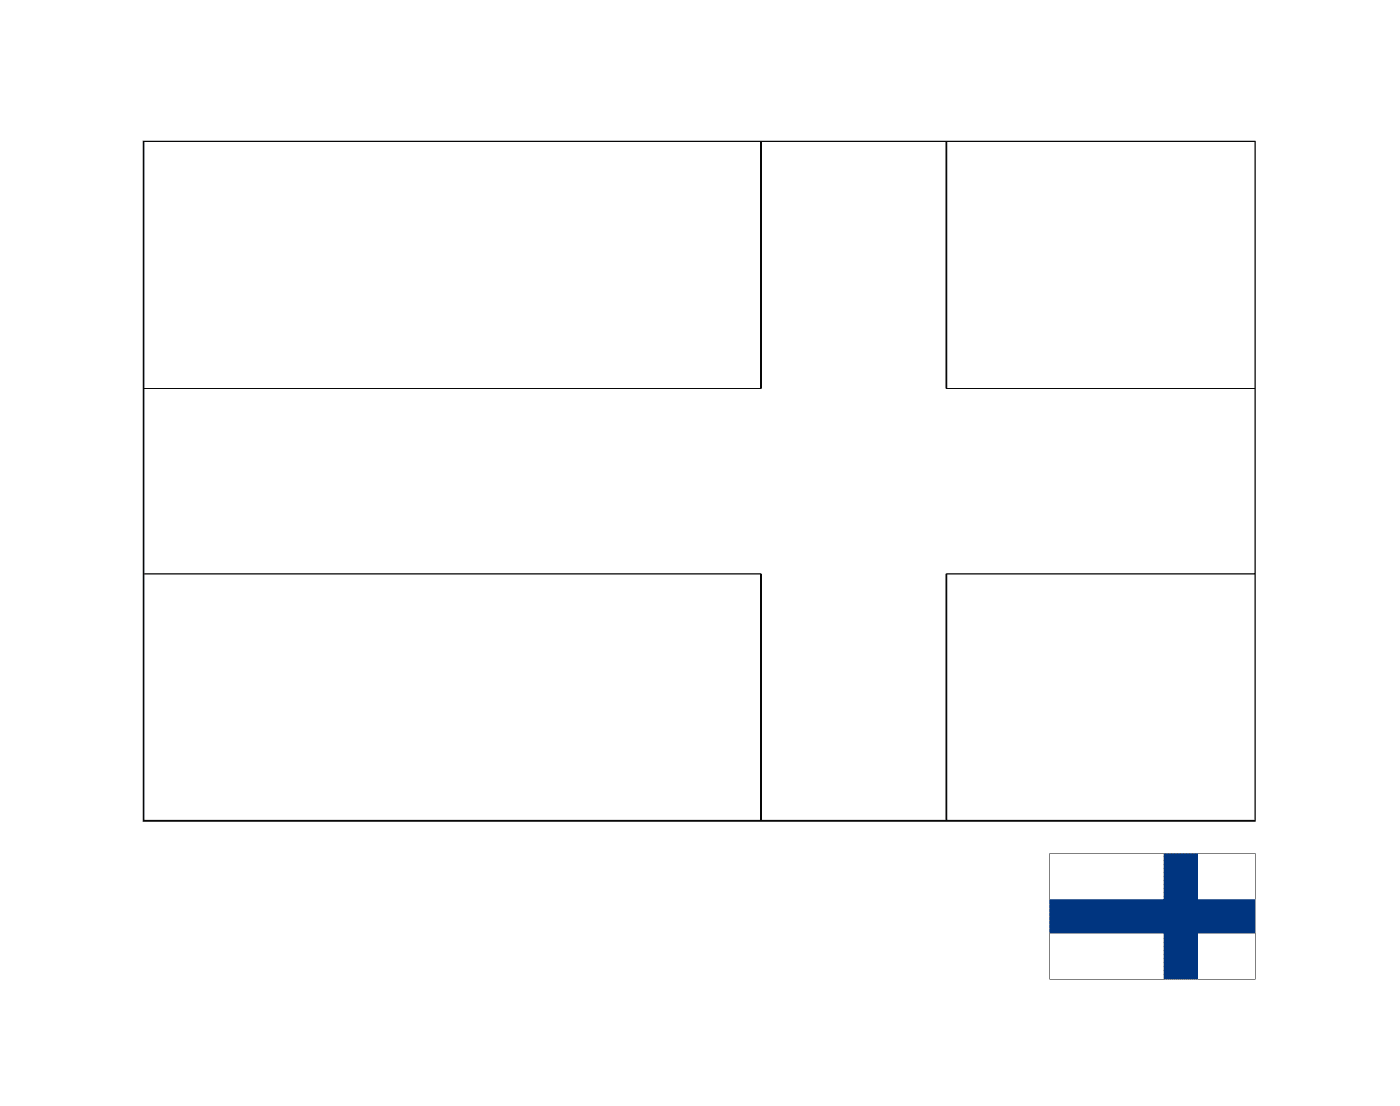  A flag of Finland 